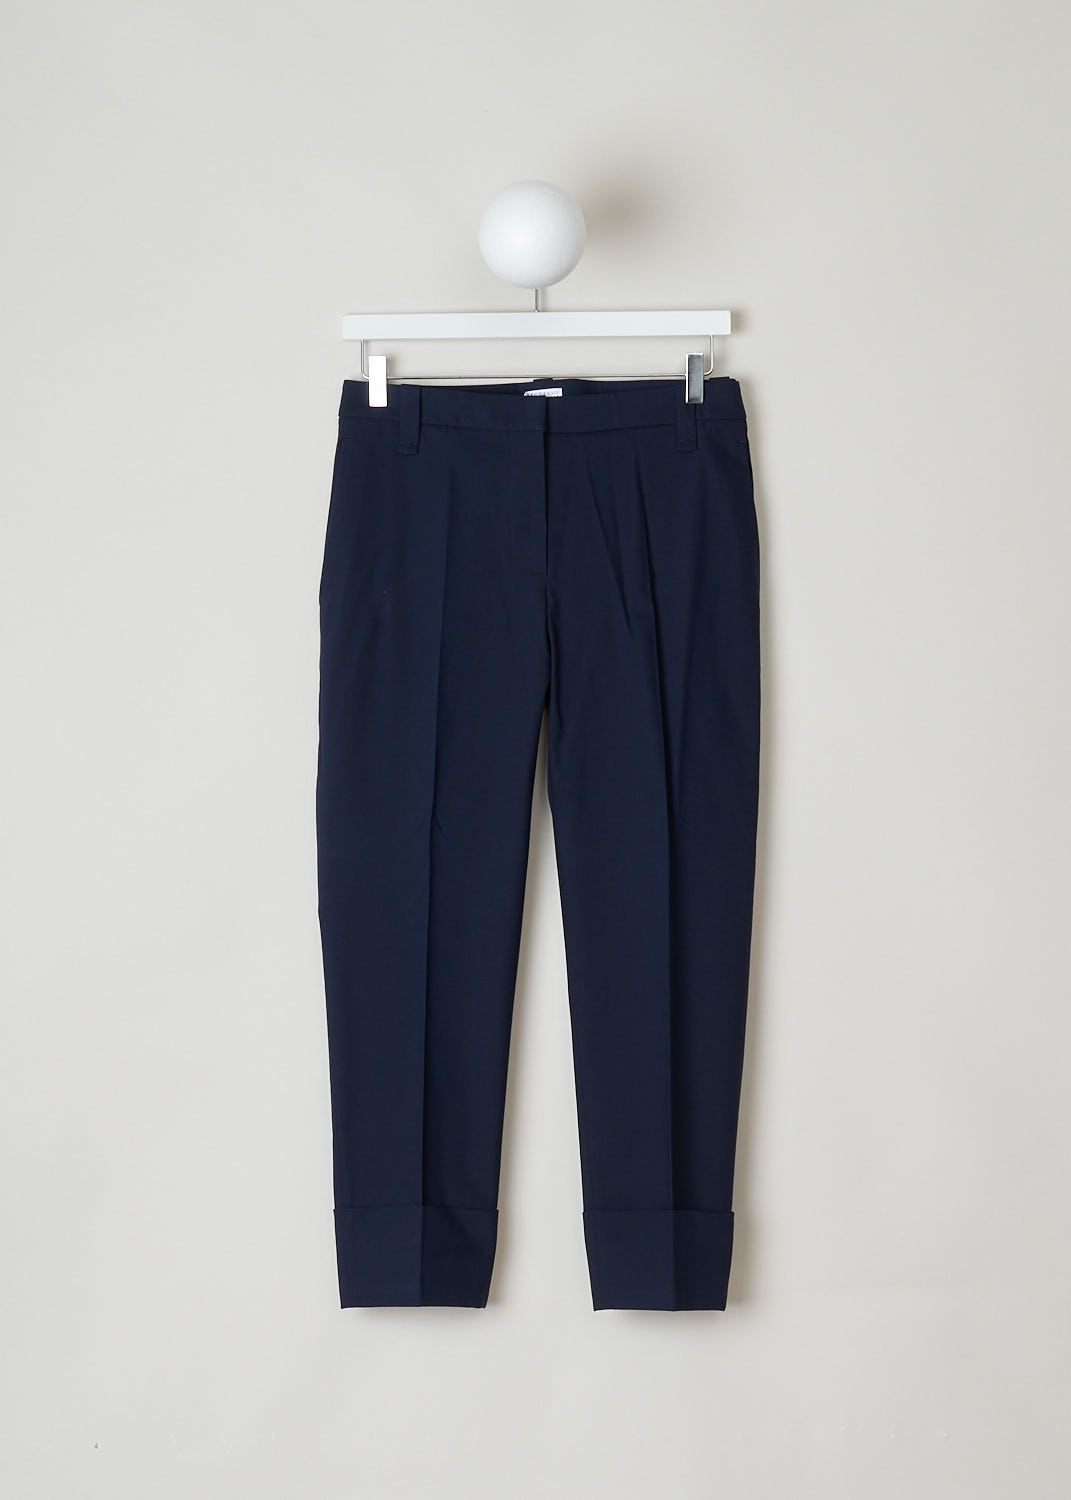 Brunello Cucinelli, Navy chino with fold-over hem, M0F70P1367_C7040, blue, front, A navy chino made of a cotton blend. Featuring forward slanted pockets on the front, and two welt pockets on the back. furthermore the belt loops are a bit broader then usual. 